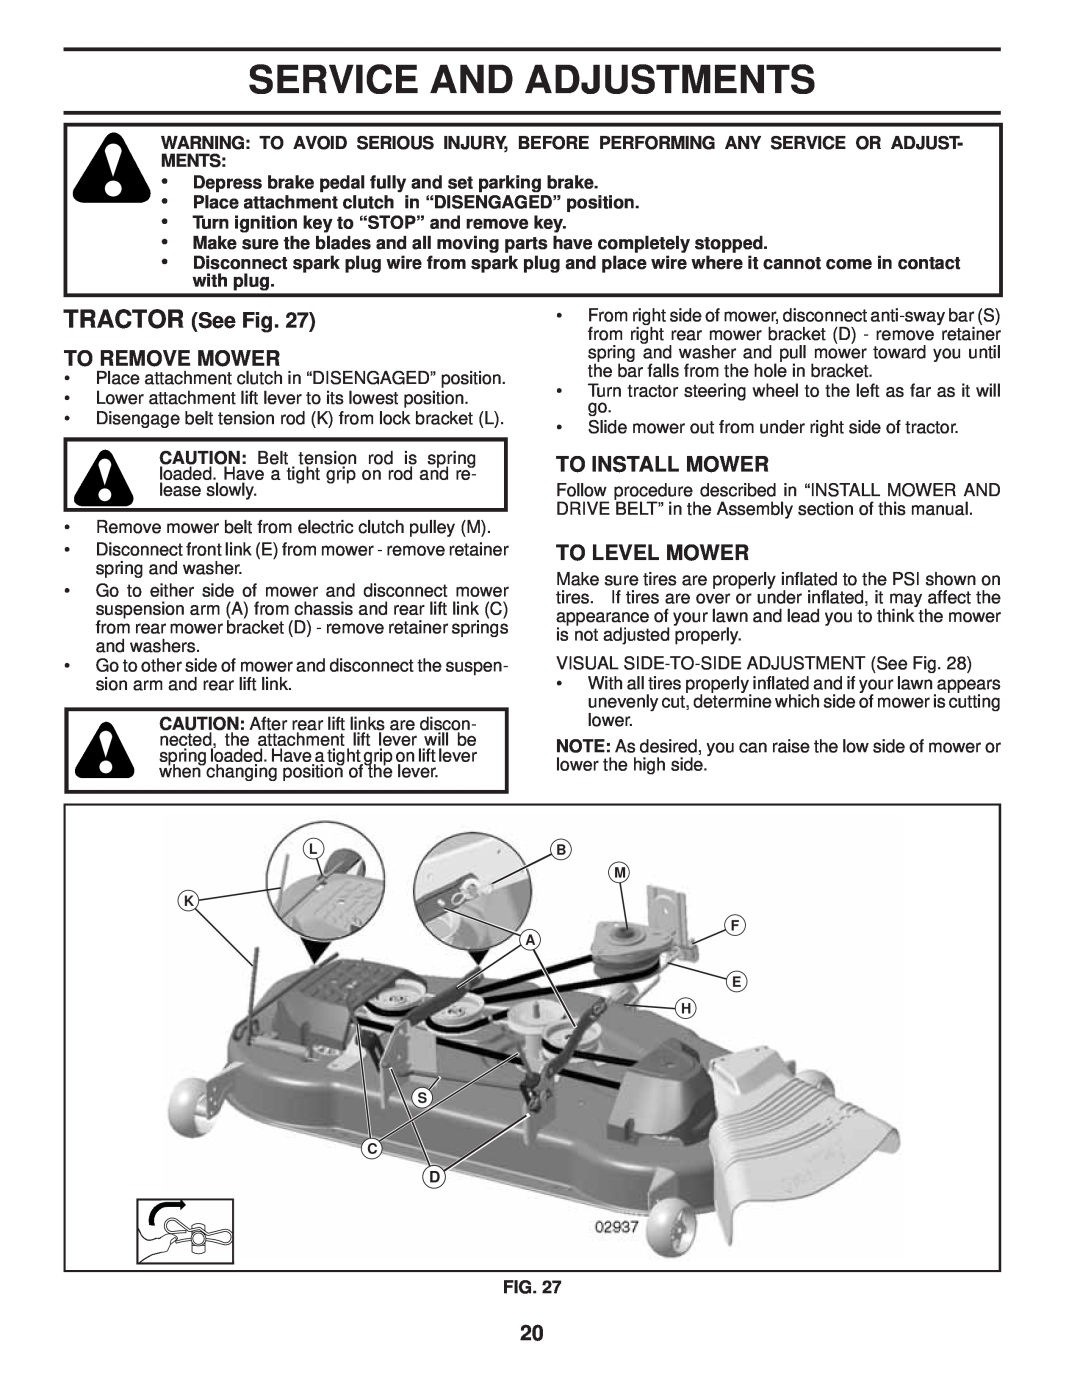 Poulan PB24H54YT manual Service And Adjustments, TRACTOR See Fig TO REMOVE MOWER, To Install Mower, To Level Mower 